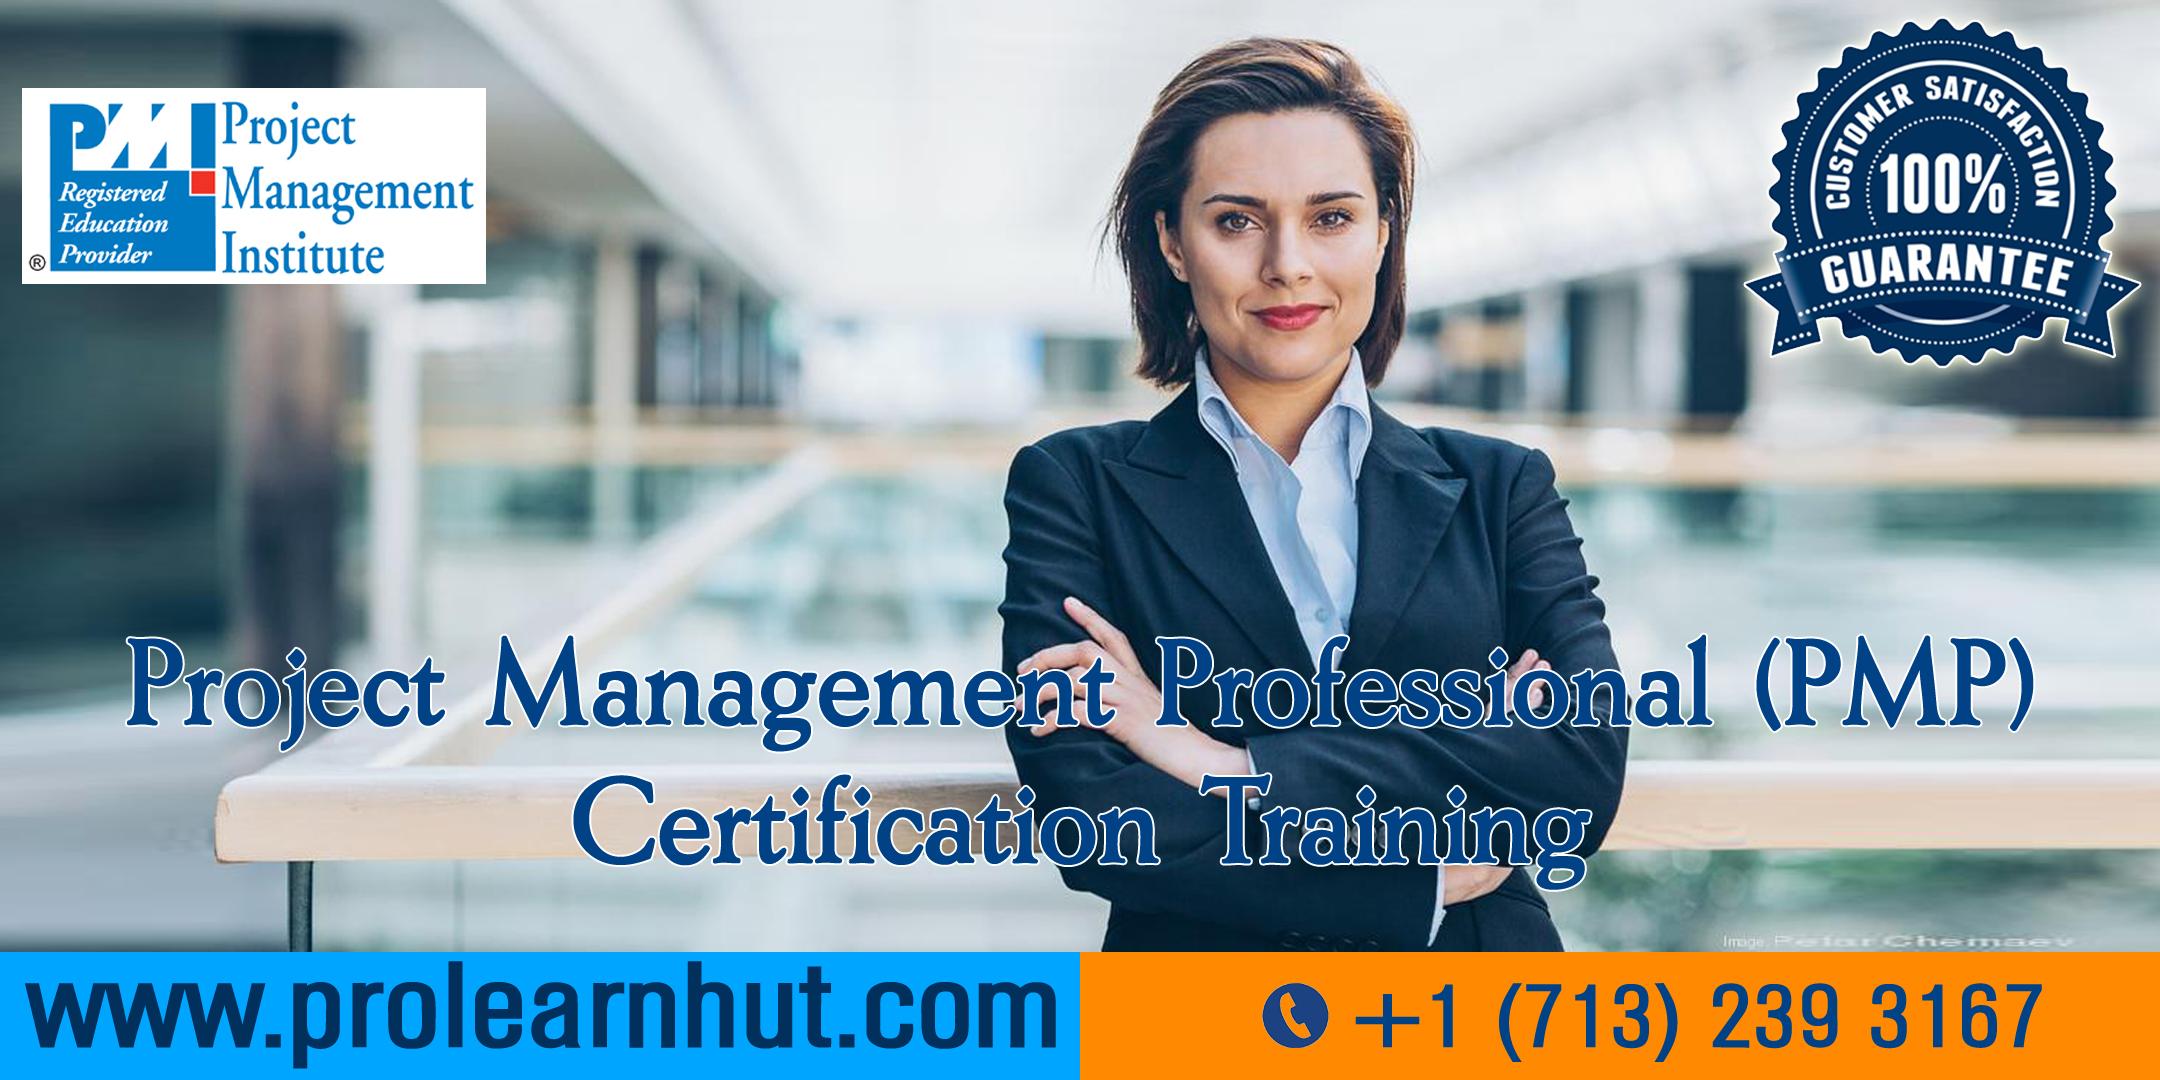 PMP Certification | Project Management Certification| PMP Training in Philadelphia, PA | ProLearnHut